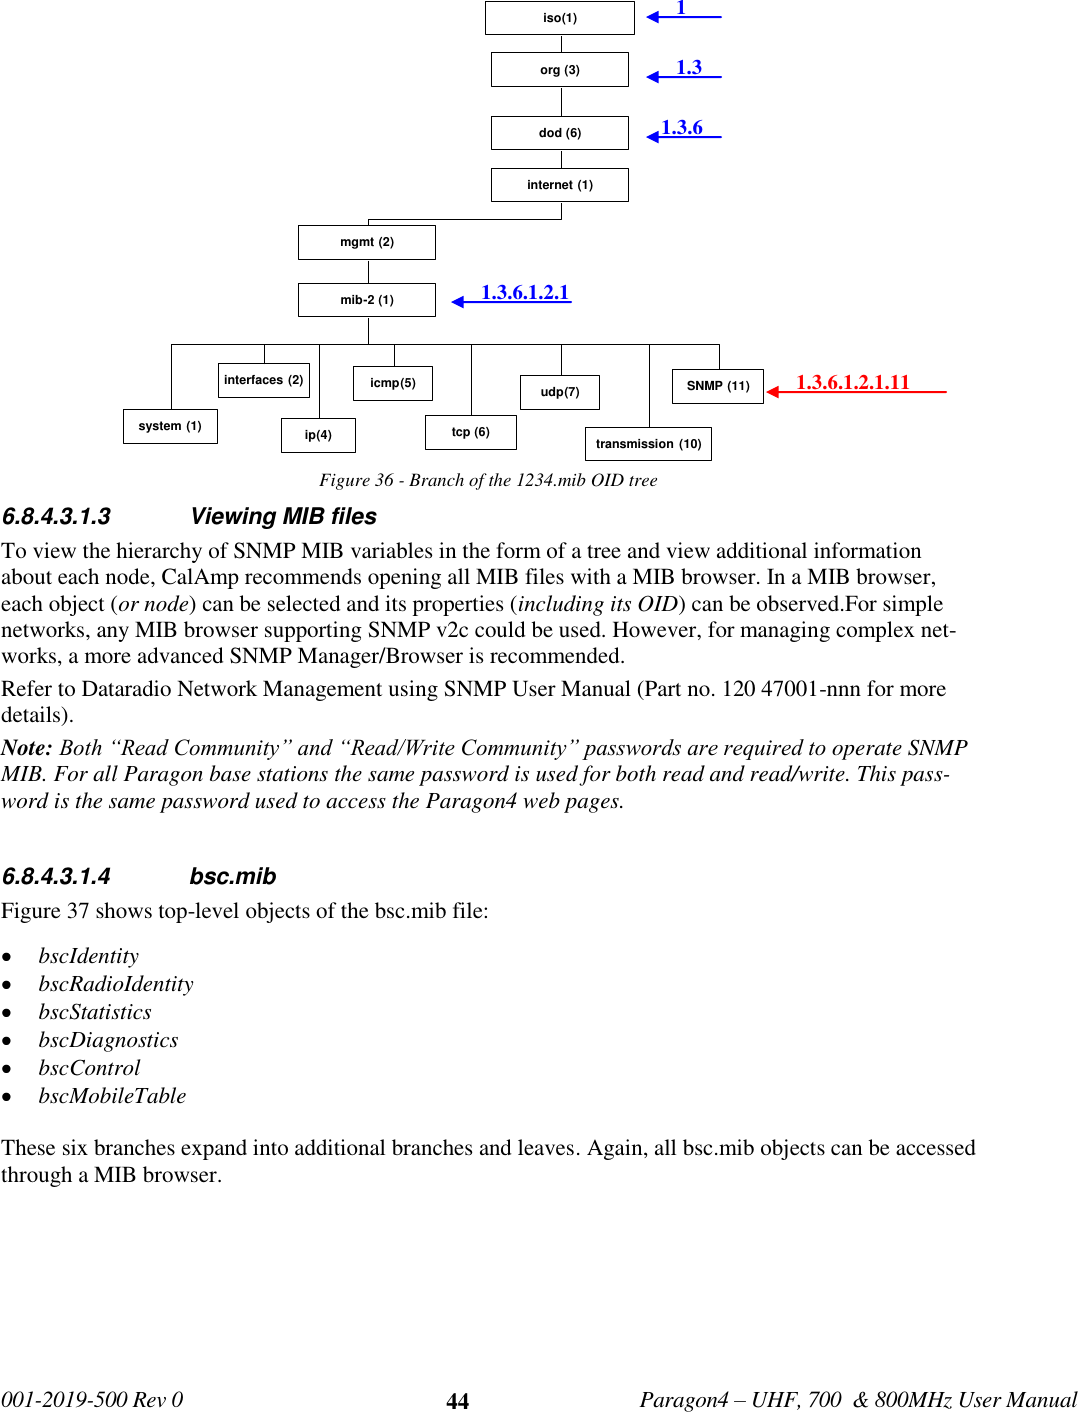   001-2019-500 Rev 0         Paragon4 – UHF, 700  &amp; 800MHz User Manual     44 Figure 36 - Branch of the 1234.mib OID tree  6.8.4.3.1.3  Viewing MIB files To view the hierarchy of SNMP MIB variables in the form of a tree and view additional information about each node, CalAmp recommends opening all MIB files with a MIB browser. In a MIB browser, each object (or node) can be selected and its properties (including its OID) can be observed.For simple networks, any MIB browser supporting SNMP v2c could be used. However, for managing complex net-works, a more advanced SNMP Manager/Browser is recommended. Refer to Dataradio Network Management using SNMP User Manual (Part no. 120 47001-nnn for more details). Note: Both “Read Community” and “Read/Write Community” passwords are required to operate SNMP MIB. For all Paragon base stations the same password is used for both read and read/write. This pass-word is the same password used to access the Paragon4 web pages.   6.8.4.3.1.4  bsc.mib  Figure 37 shows top-level objects of the bsc.mib file:  bscIdentity  bscRadioIdentity  bscStatistics  bscDiagnostics  bscControl  bscMobileTable  These six branches expand into additional branches and leaves. Again, all bsc.mib objects can be accessed through a MIB browser.    org(3)iso(1)ip(4)icmp(5)SNMP(11)udp(7)system(1)interfaces(2)dod(6)internet(1)mgmt(2)mib-2(1)tcp(6)transmission(10)1.3.6.1.2.1 1.3.6.1.2.1.11 1 1.3.6 1.3 